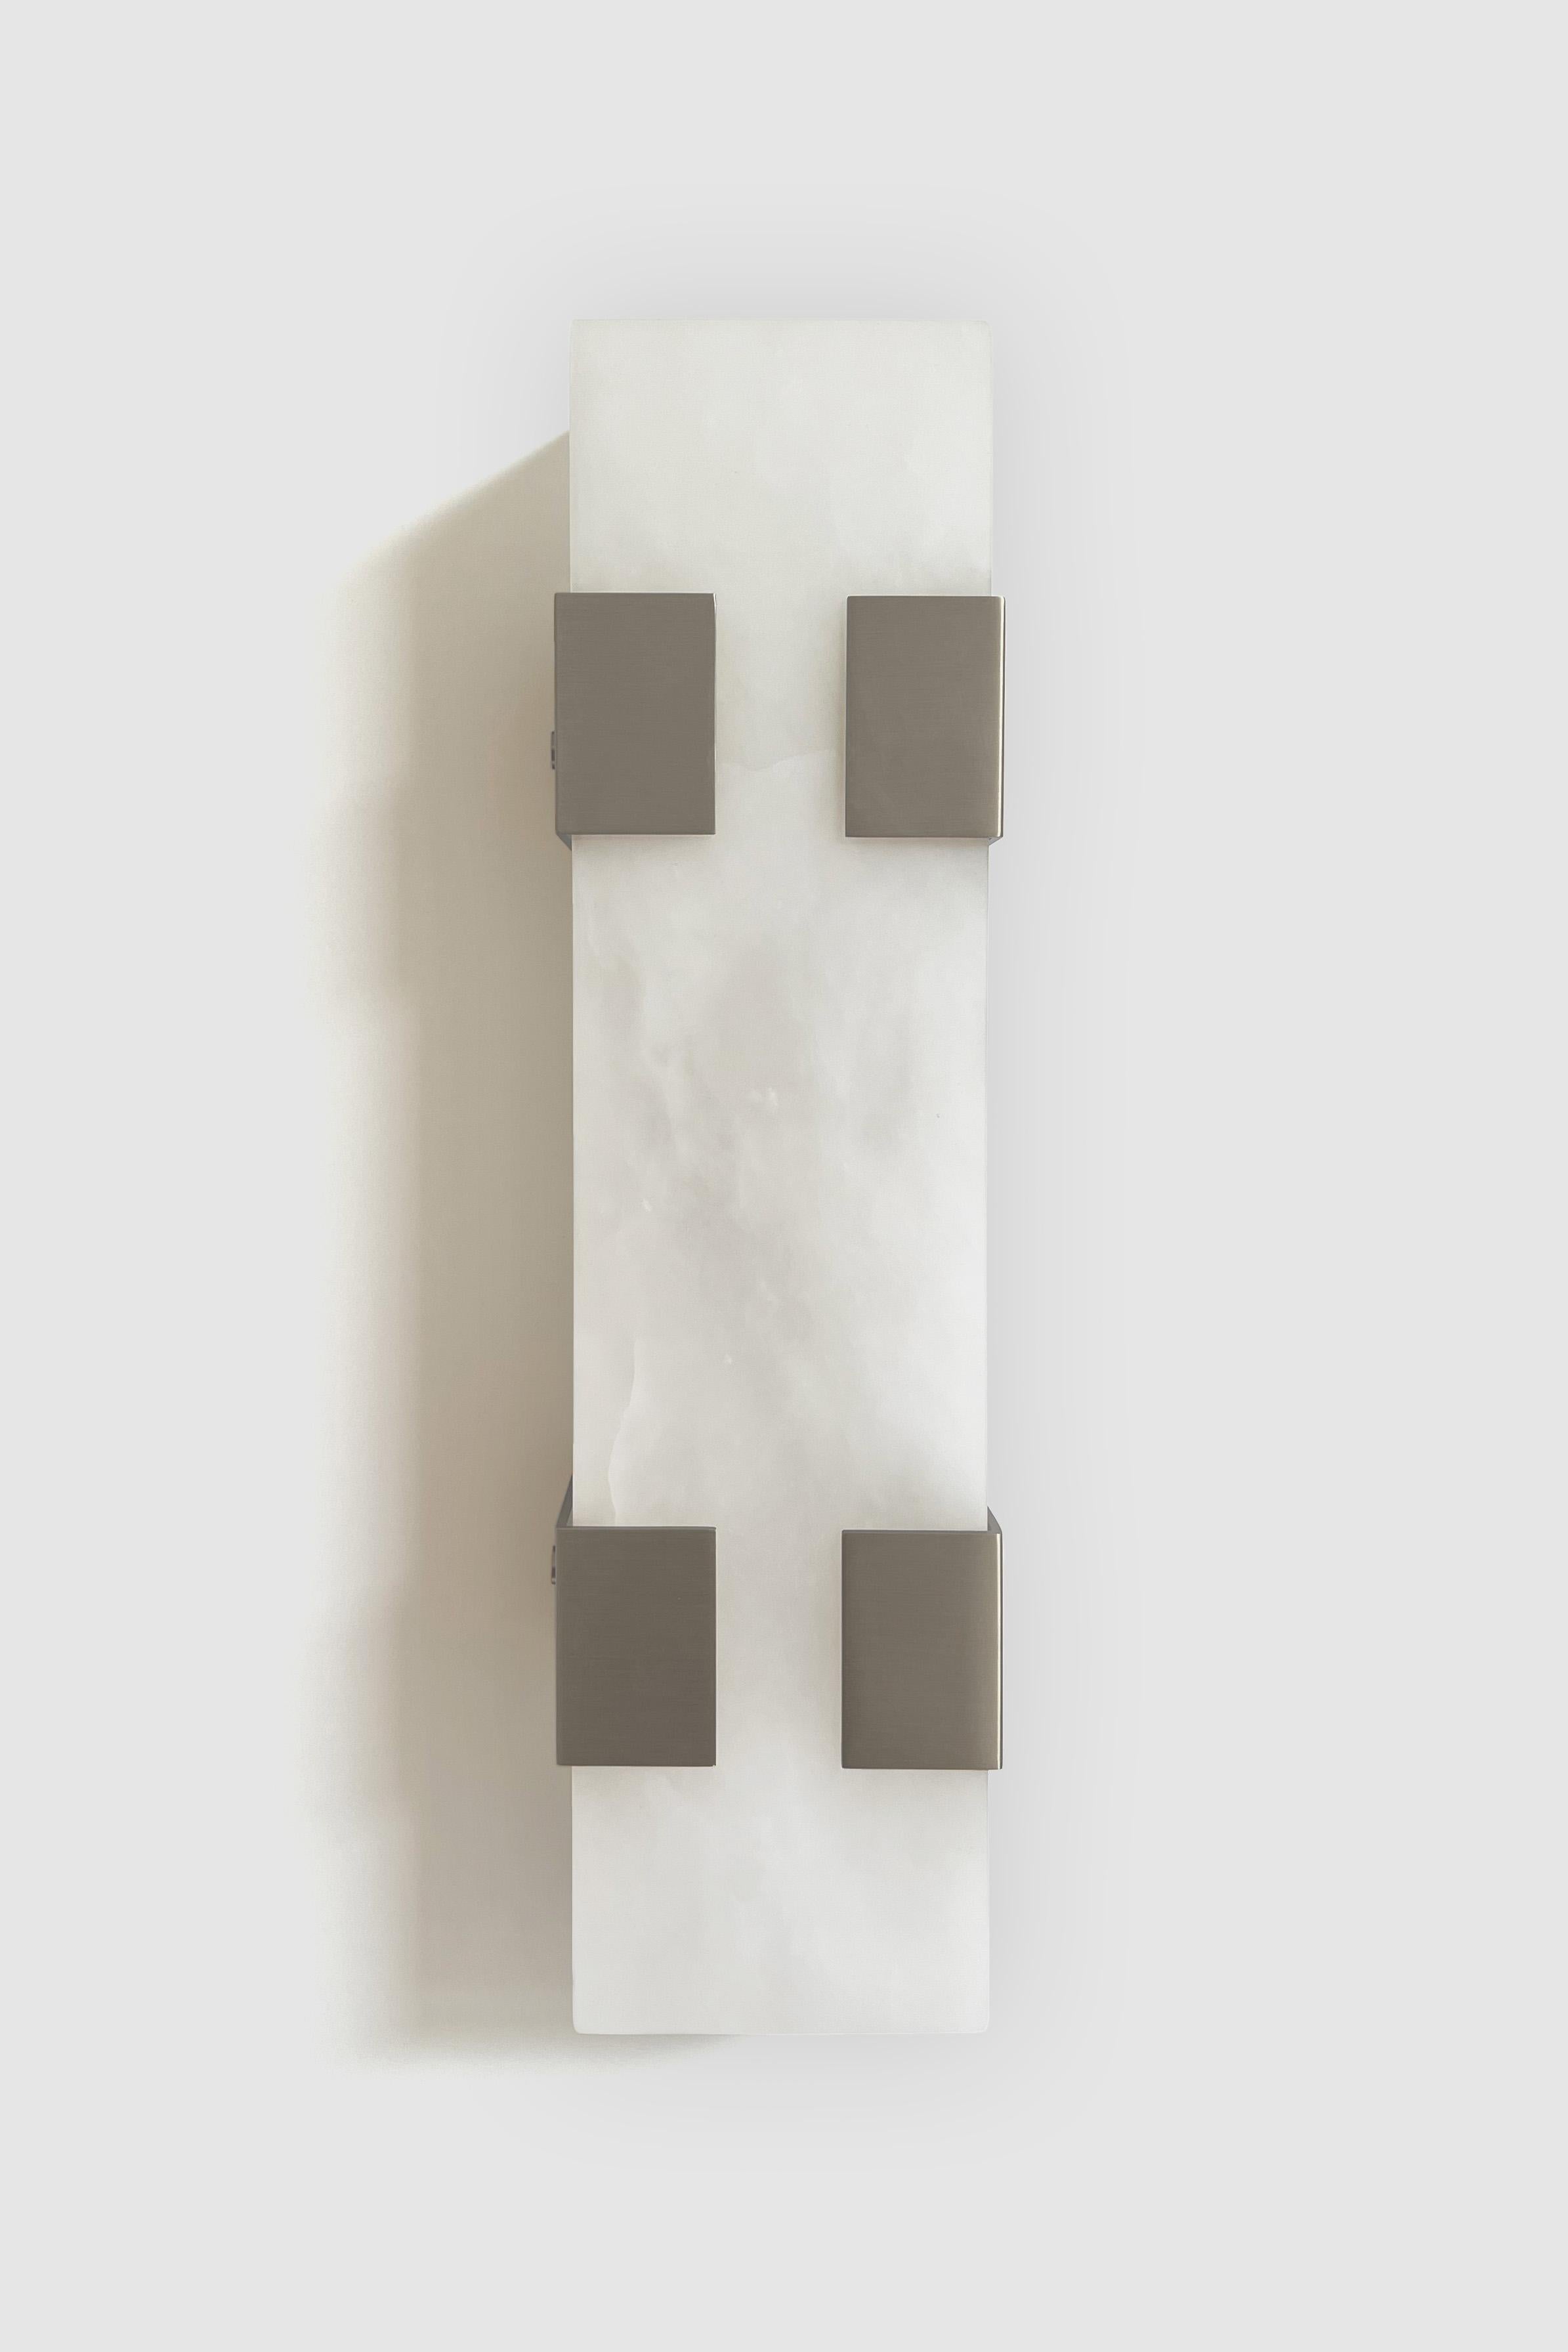 Orphan Work 003-4C Sconce
Shown in brushed nickel and alabaster 
Available in brushed brass, brushed nickel and blackened brass. 
Measures: 5 3/8”H x 19”W x 3 7/8”D
Wall or ceiling mount
Vertical or horizontal
Plug-in by request
1-4 adjustable